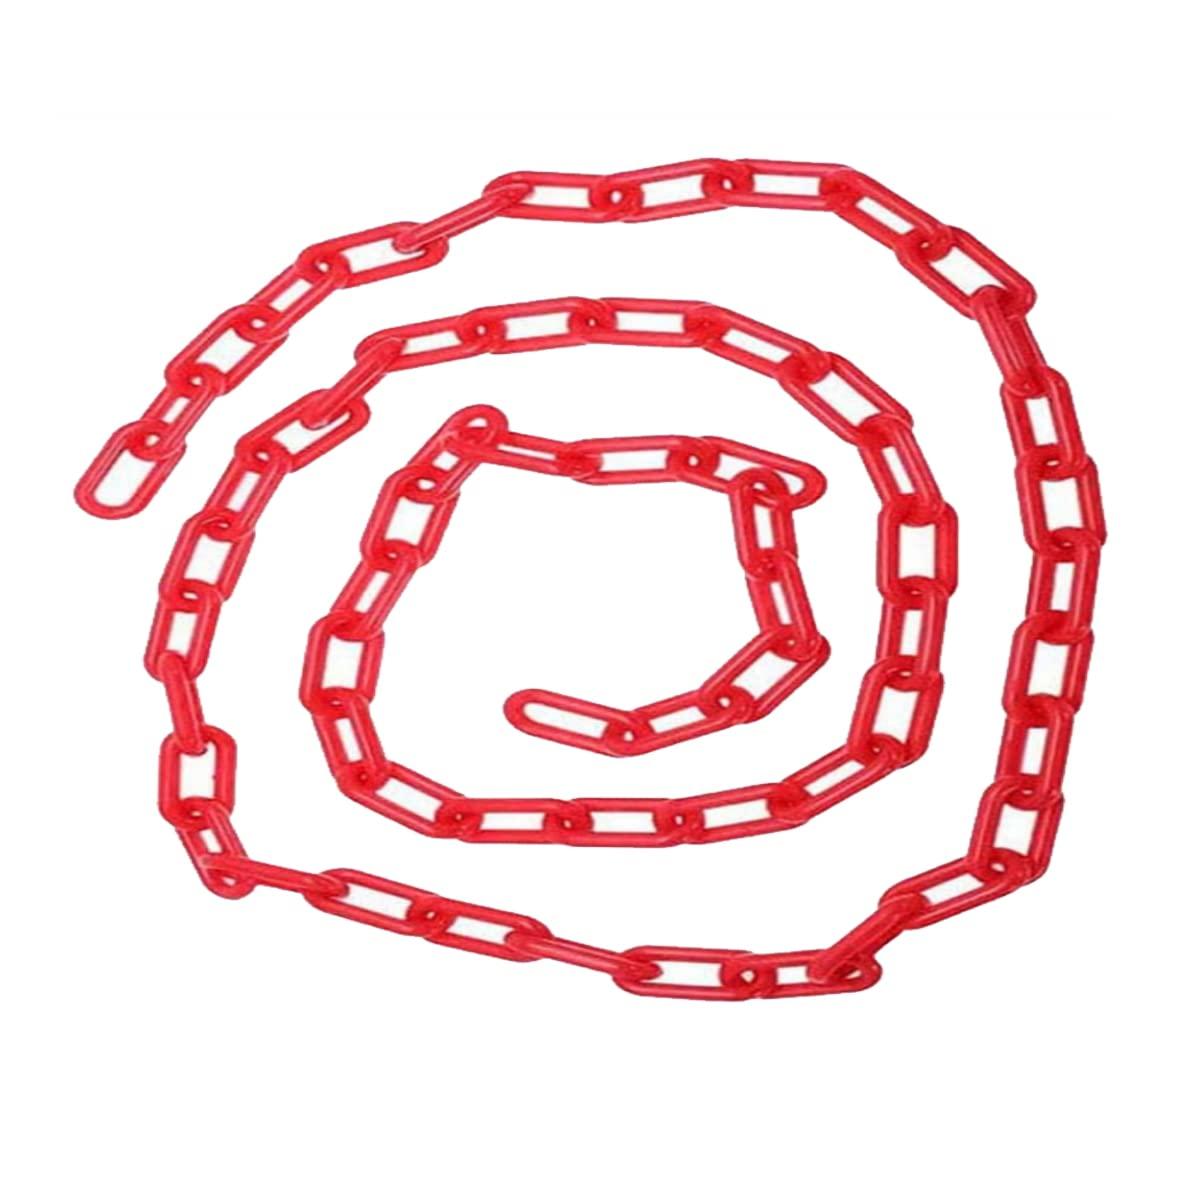 MACHSWON 10m x 10mm Plastic Chains Barrier Safety Plastic Chain Warning Post Road Cone Chain Isolation Chains for Transportation Facility,Decorative Garden Fence Red